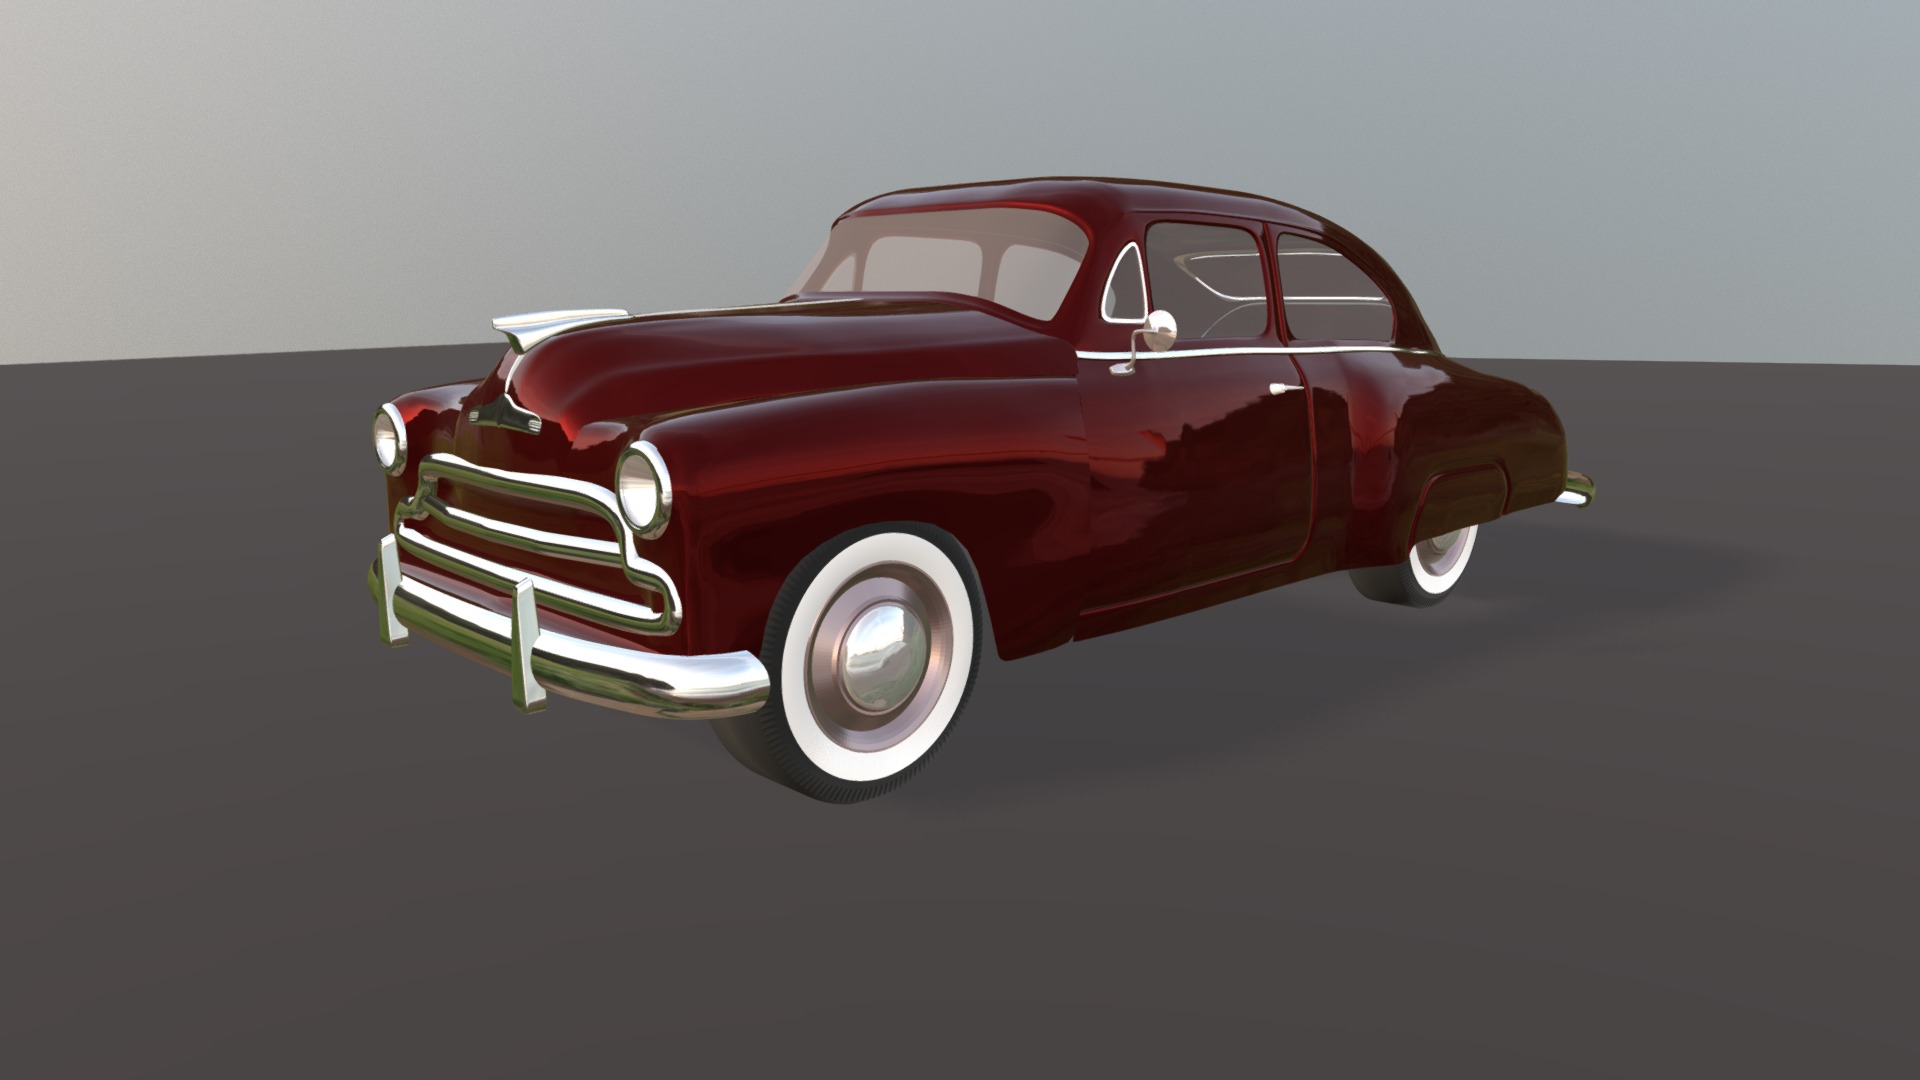 3D model Chev Sedan - This is a 3D model of the Chev Sedan. The 3D model is about a red car on a white surface.